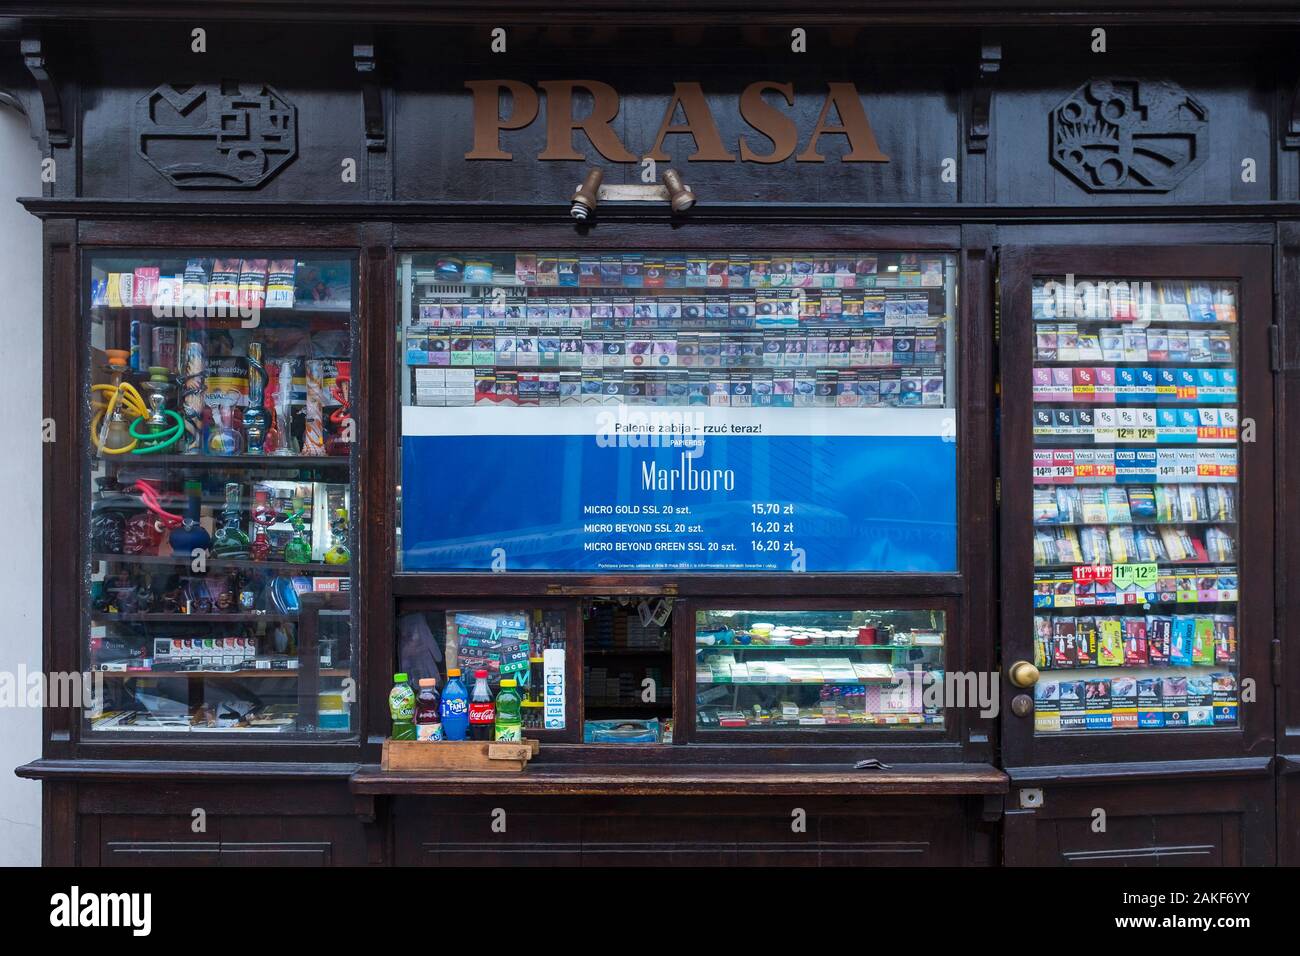 A small shop or street kiosk selling many varieties of cigarettes and tobacco in Krakow, Poland Stock Photo